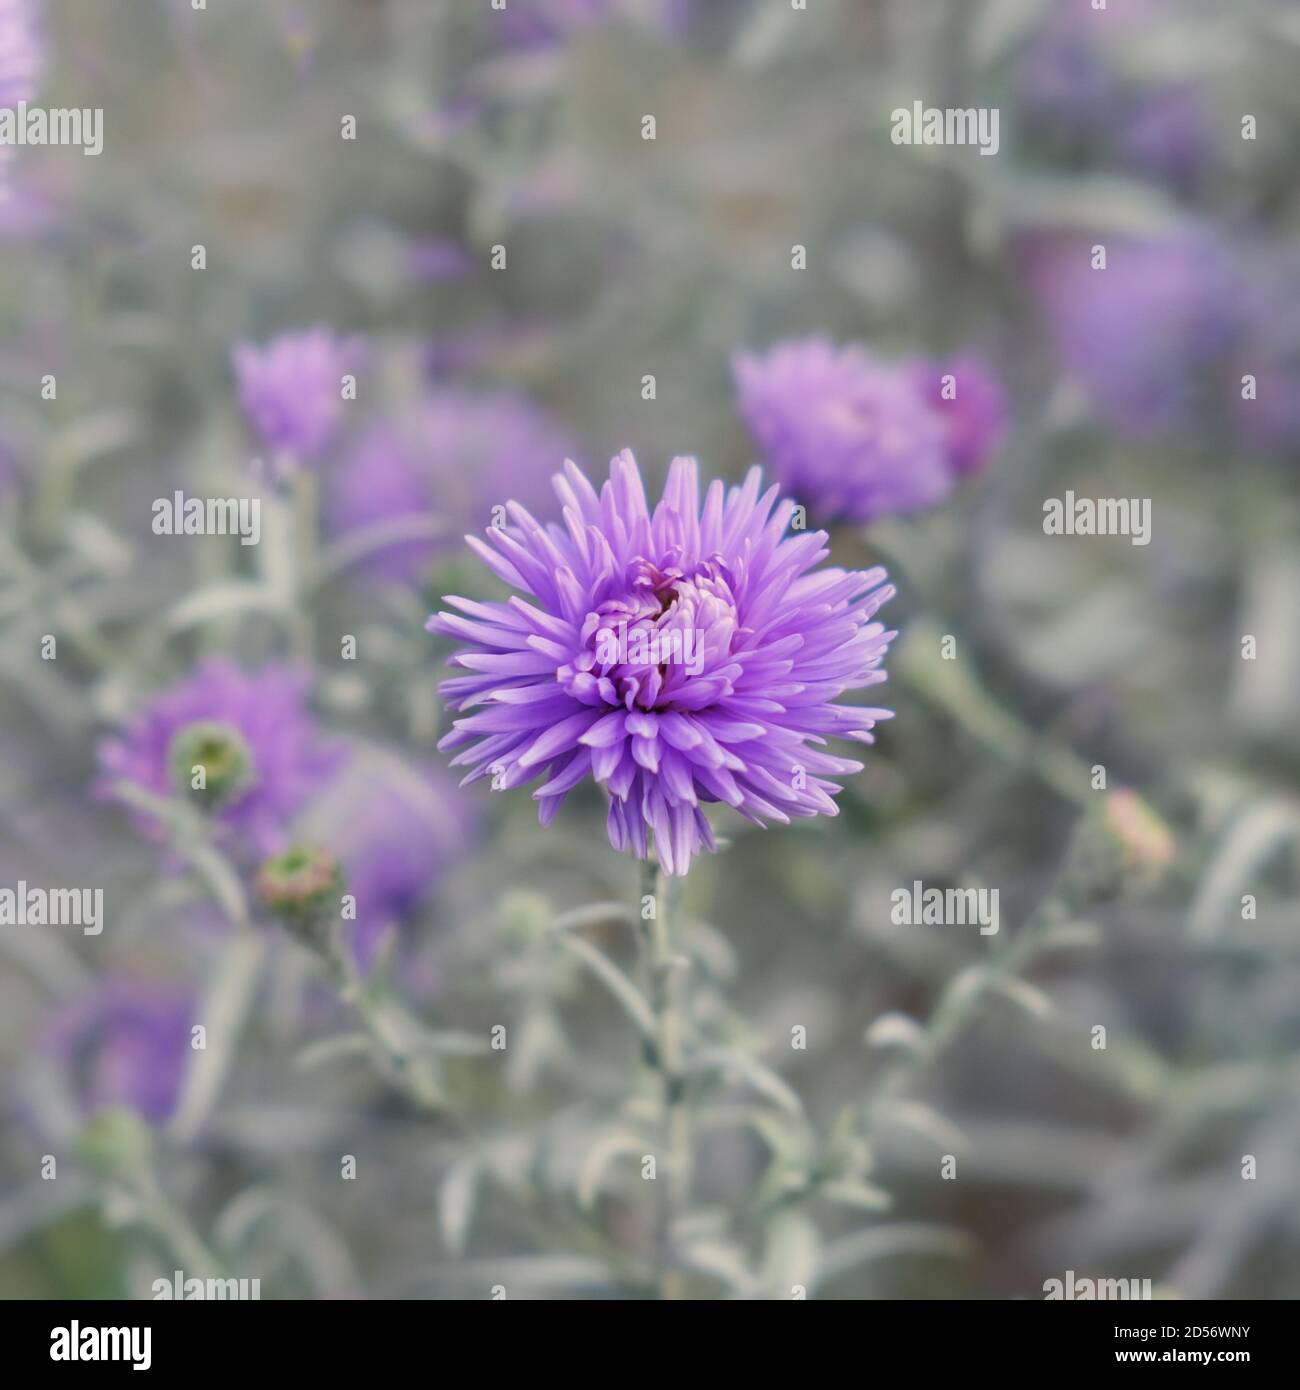 Selective focus to violet-lavender Aster Alpinus or blue Alpine Daisy on blurred autumnal garden flower bed background. Stock Photo